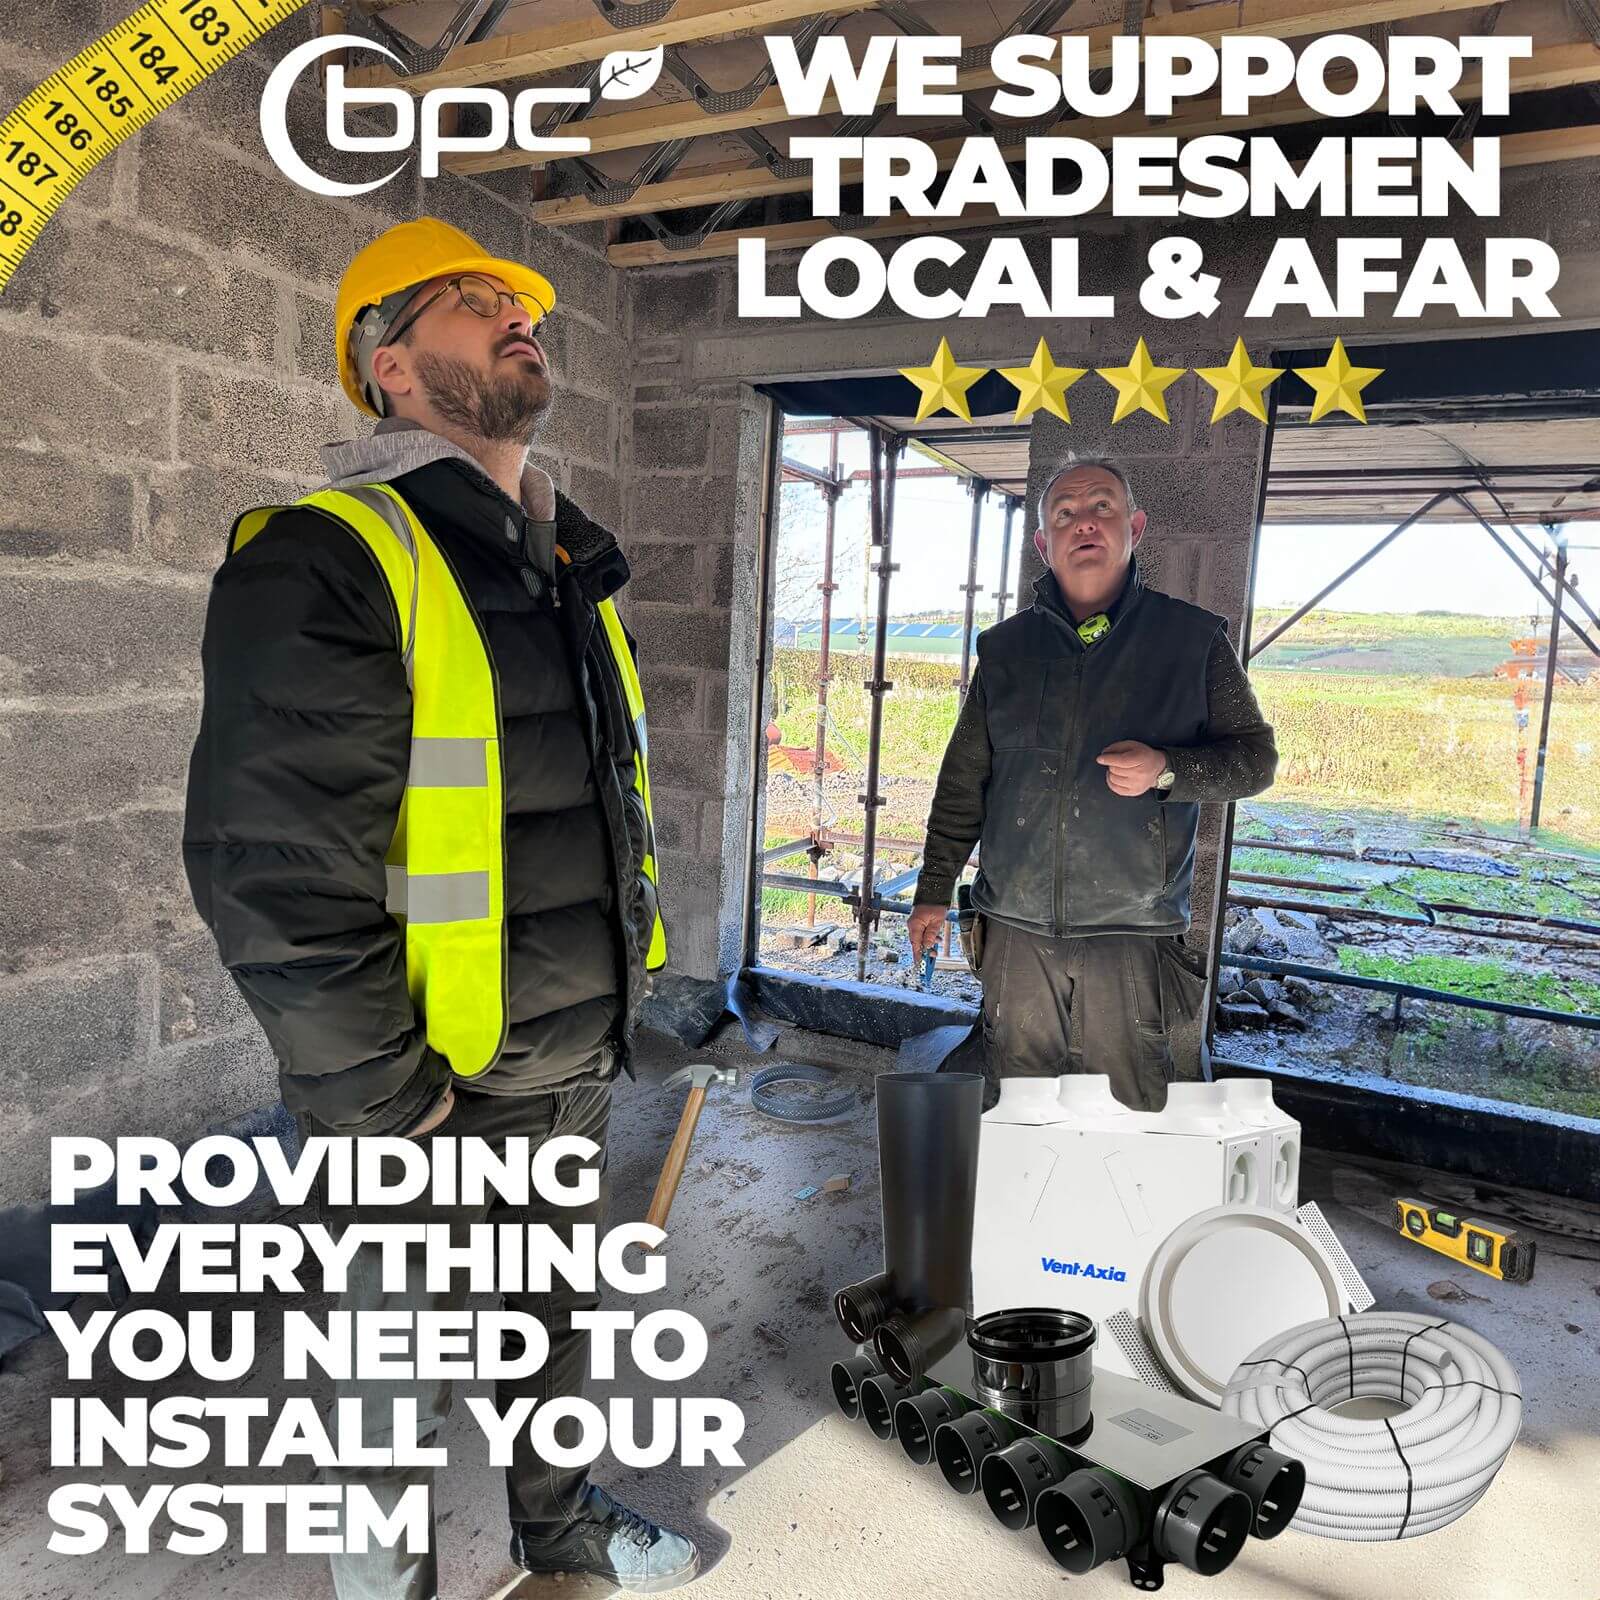 BPC Ventilation's Commitment to Local Trade